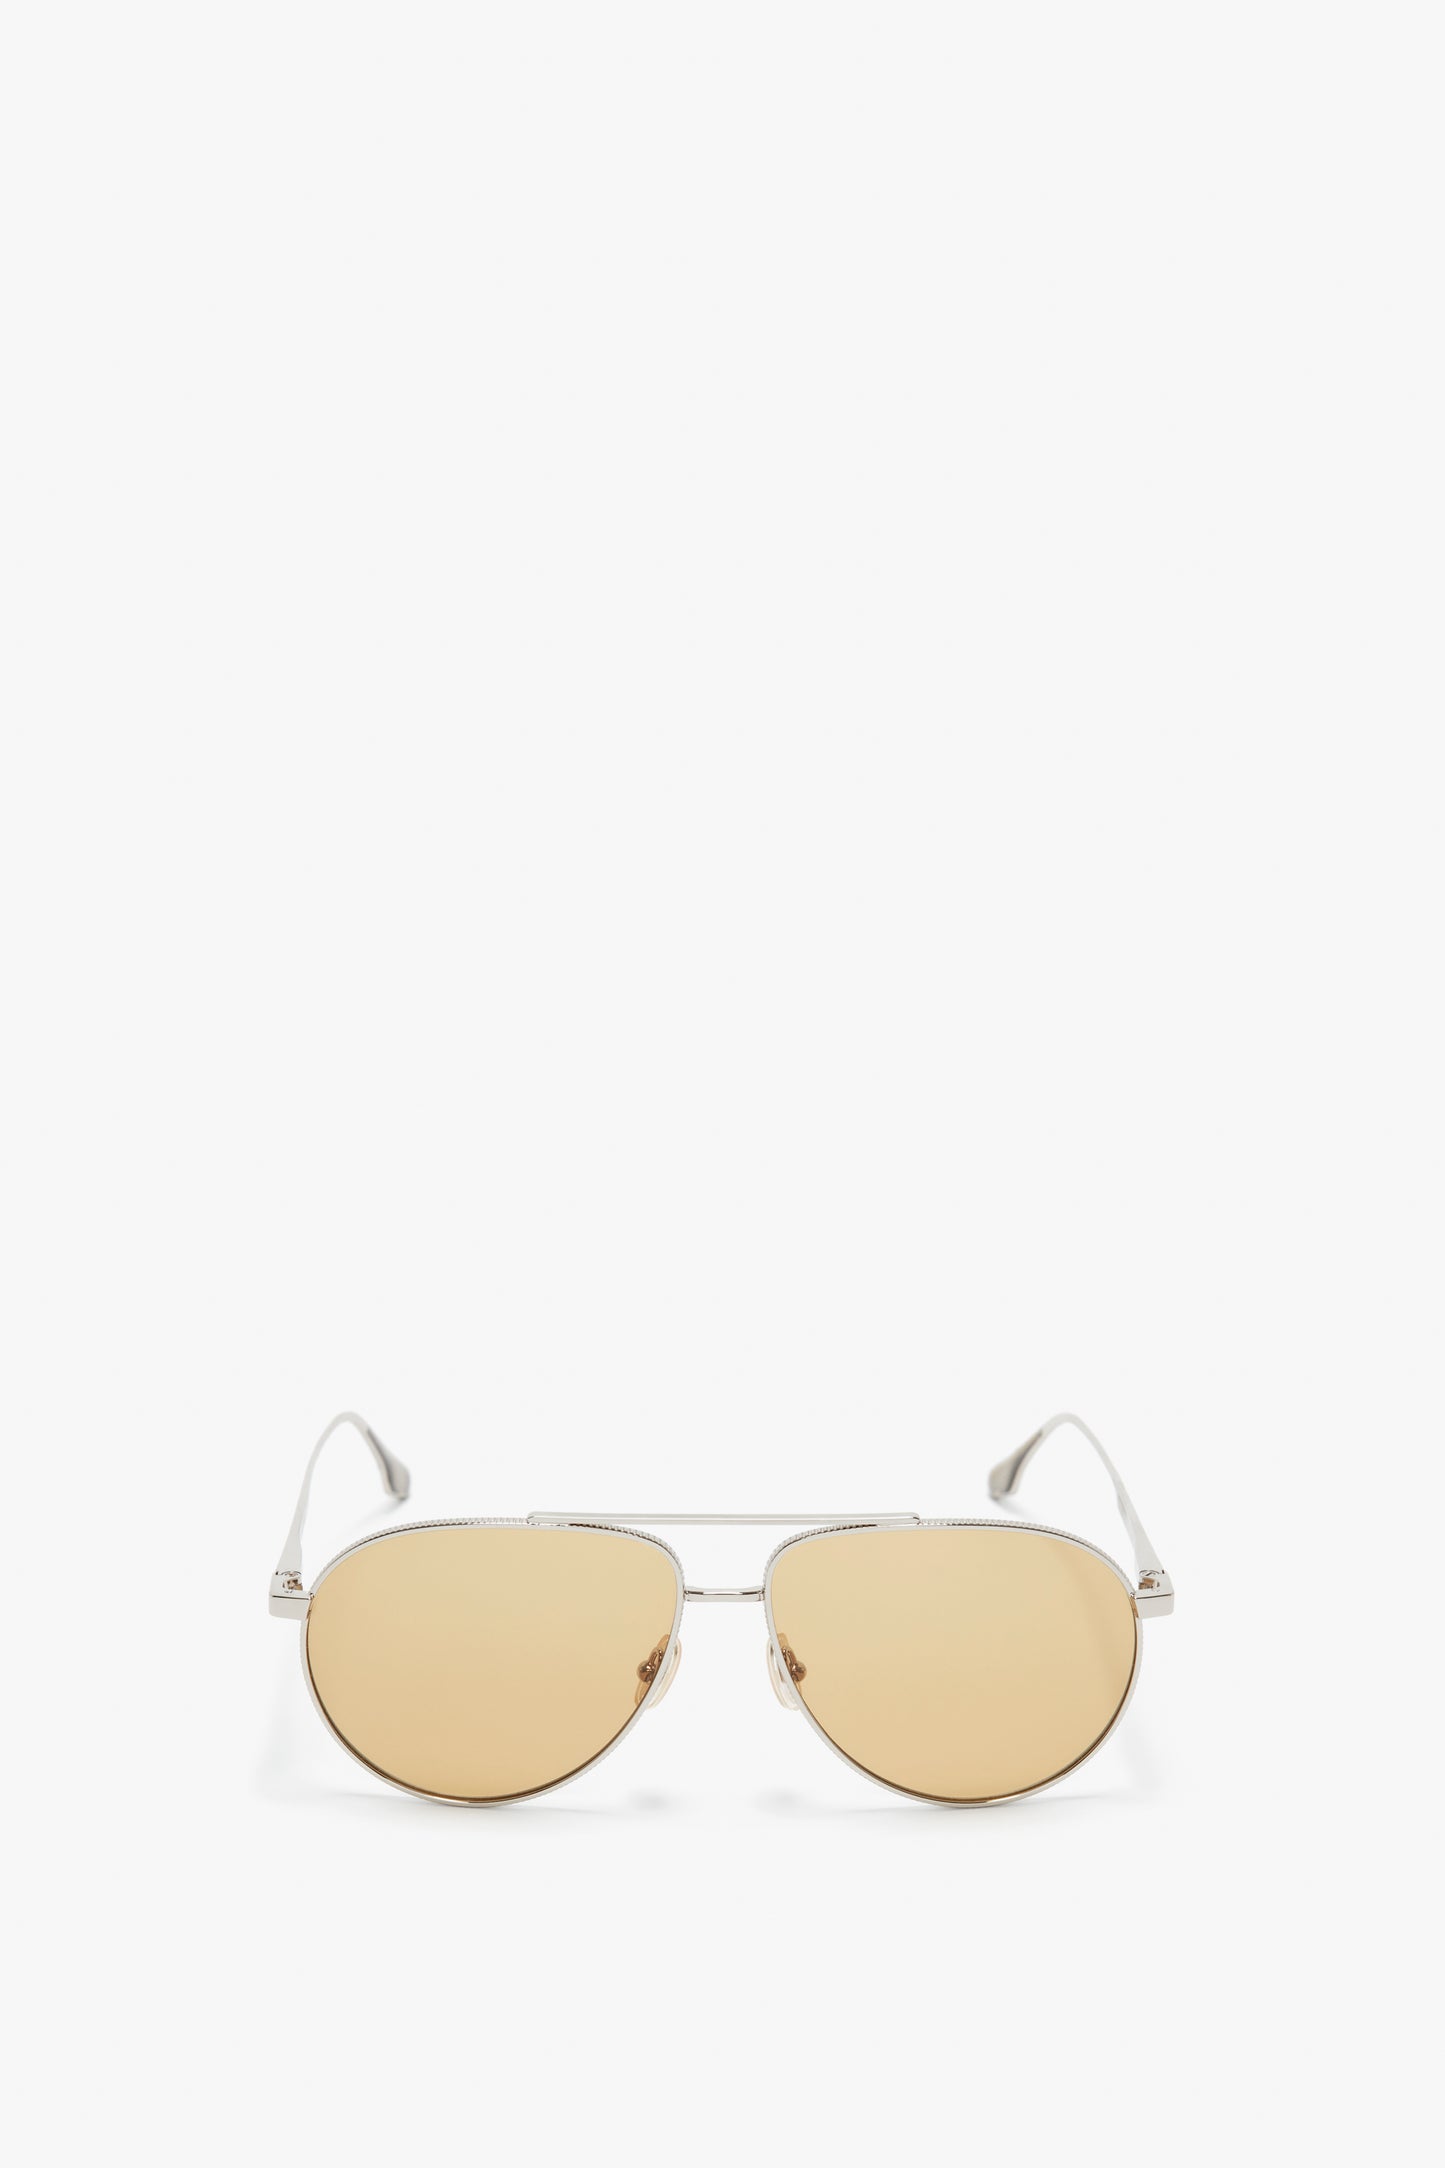 A pair of Victoria Beckham V Metal Pilot Sunglasses In Silver-Brown, with a thin silver frame and light brown tinted lenses, isolated on a white background.